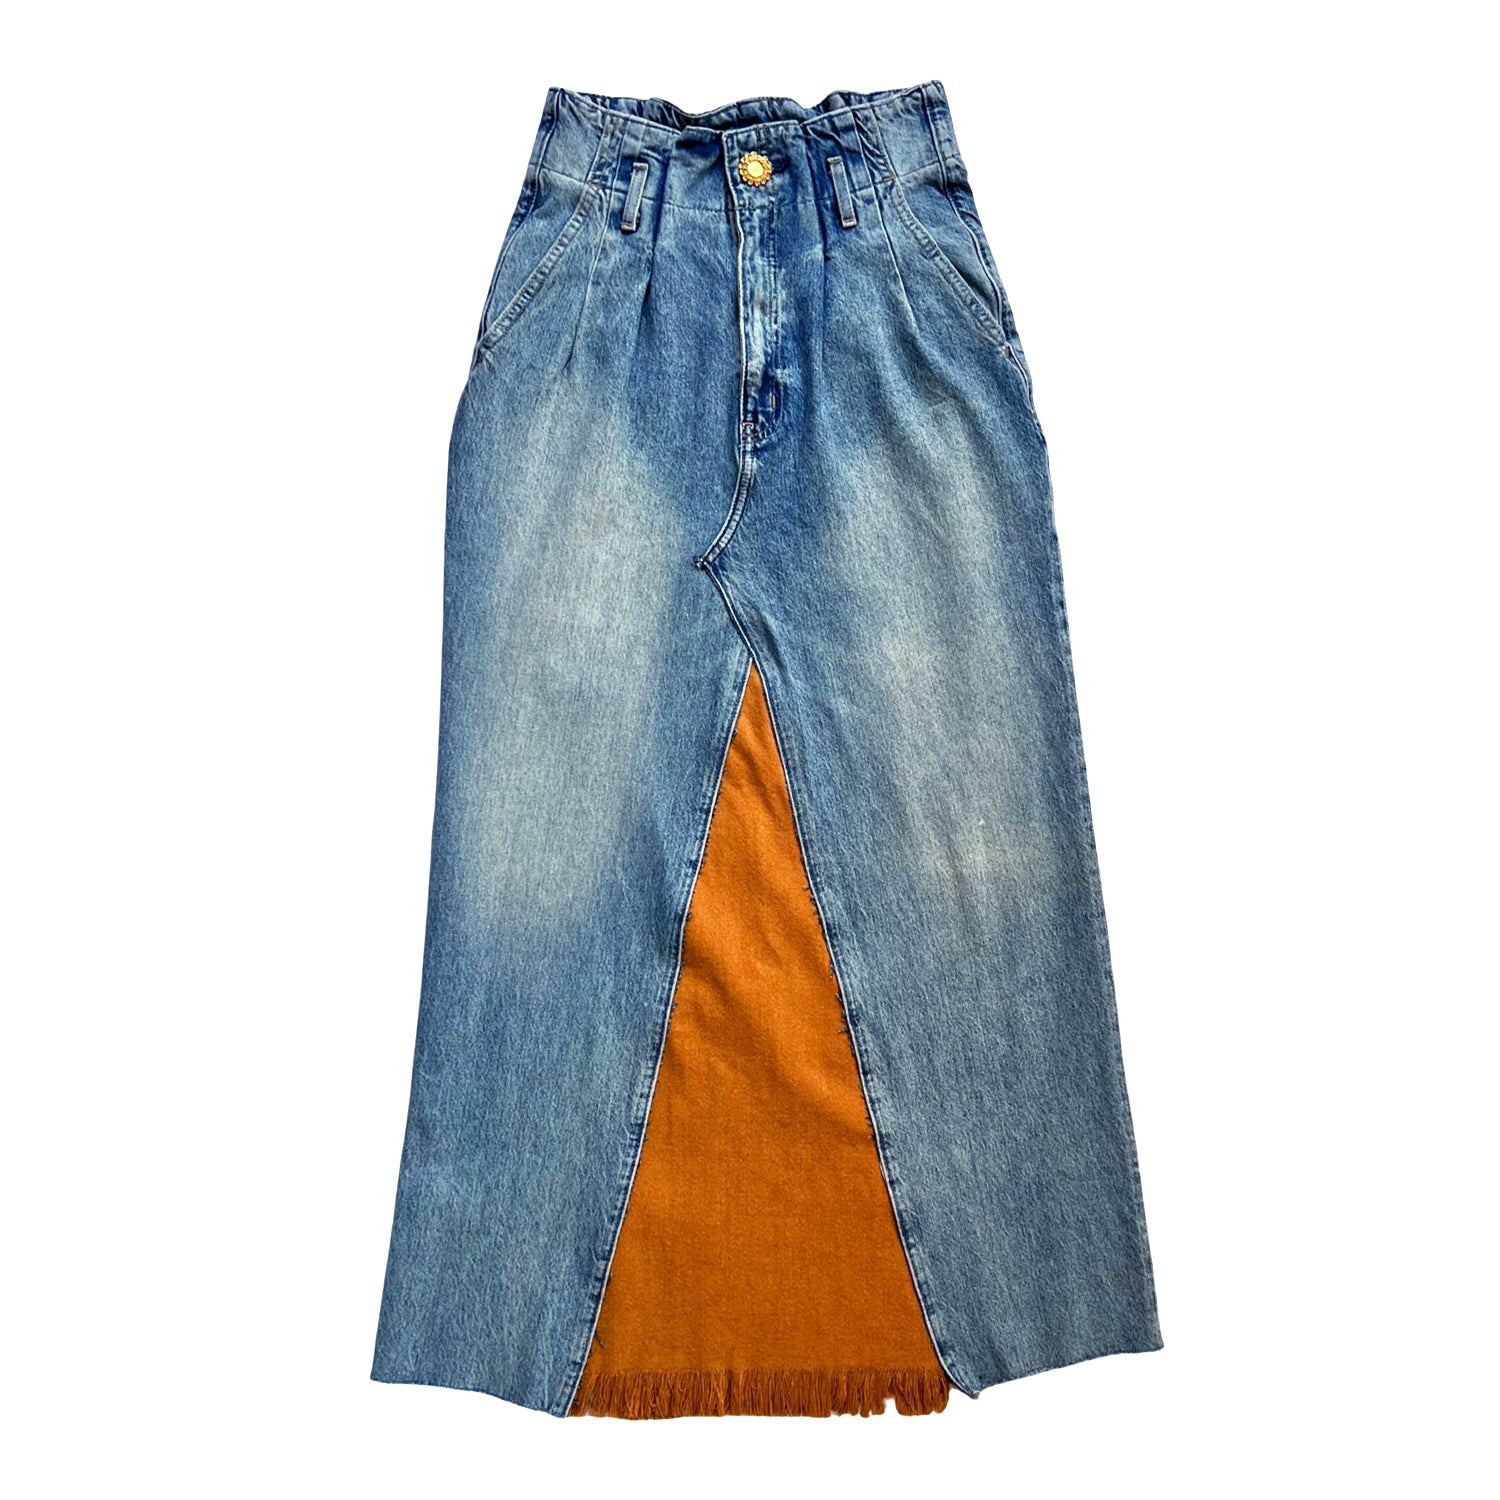 L2r The Label Women's Blue / Brown Upcycled Skirt In Paneled Blue & Tan Denim